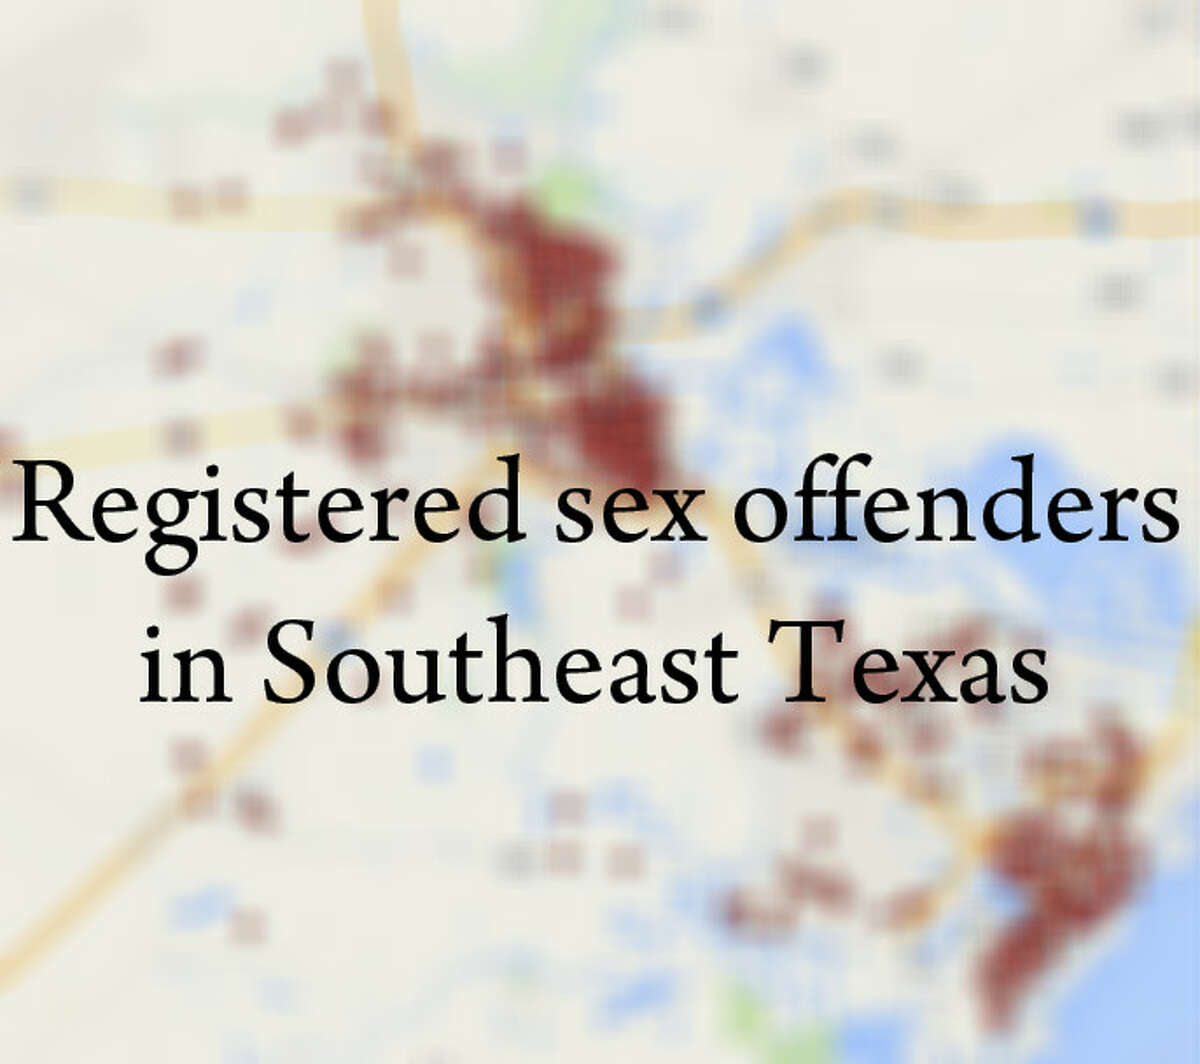 There are a combined 1,272 registered sex offenders in Jefferson, Orange and Hardin counties. Click to see what your zip code looks like in the state's sex offender database.